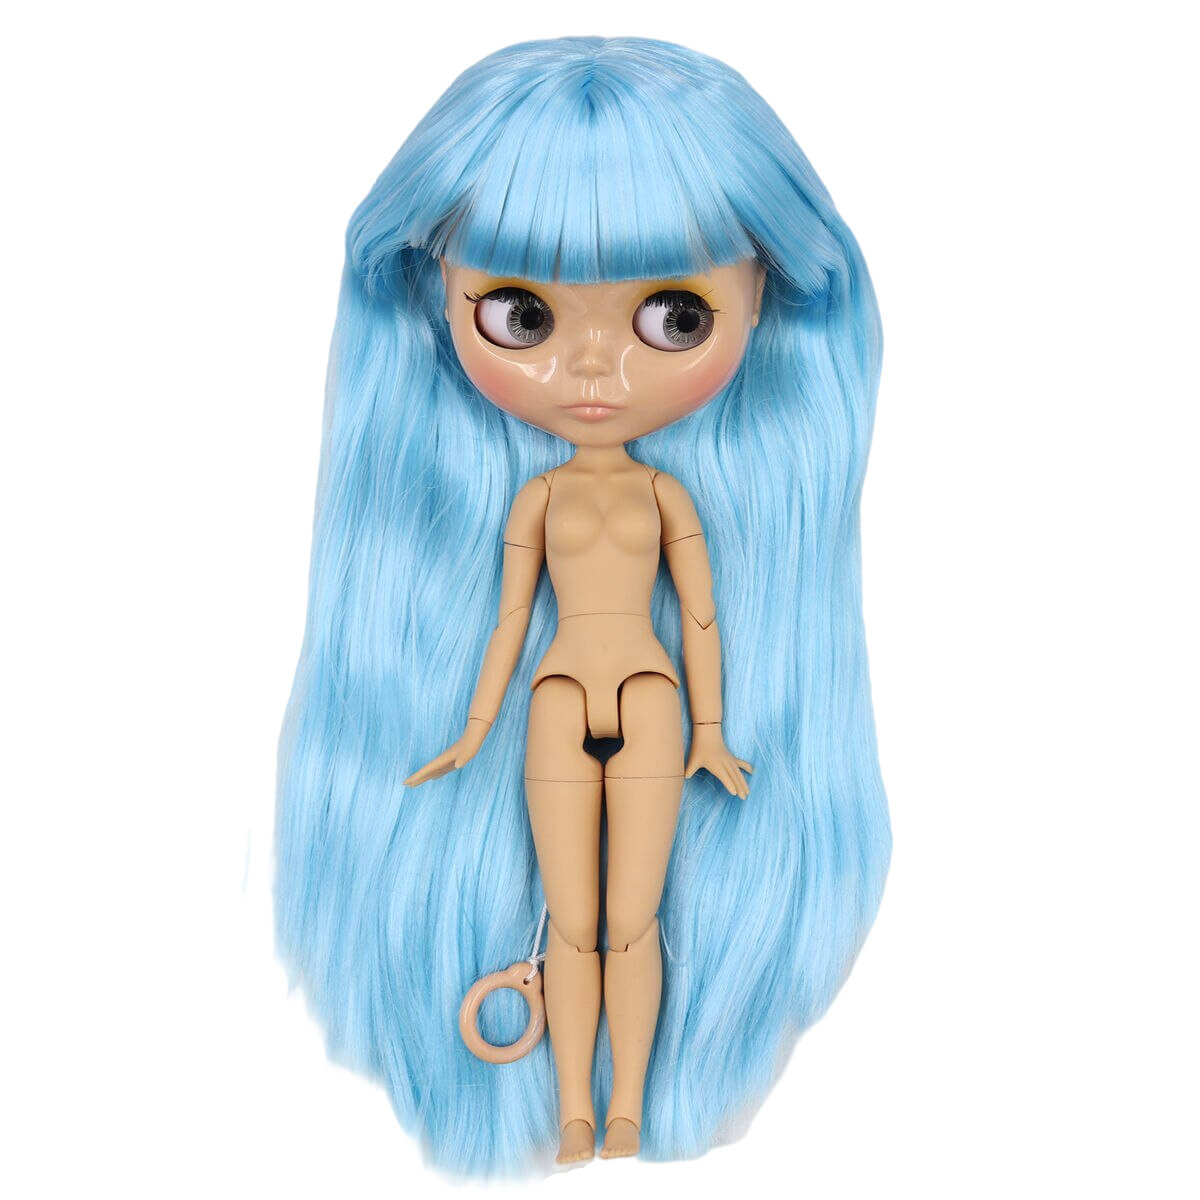 Neo Blythe Doll with Blue Hair, Tan Skin, Shiny Face & Jointed Body Blue Hair Factory Blythe Doll Shiny Face Factory Blythe Doll Tan Skin Factory Blythe Doll